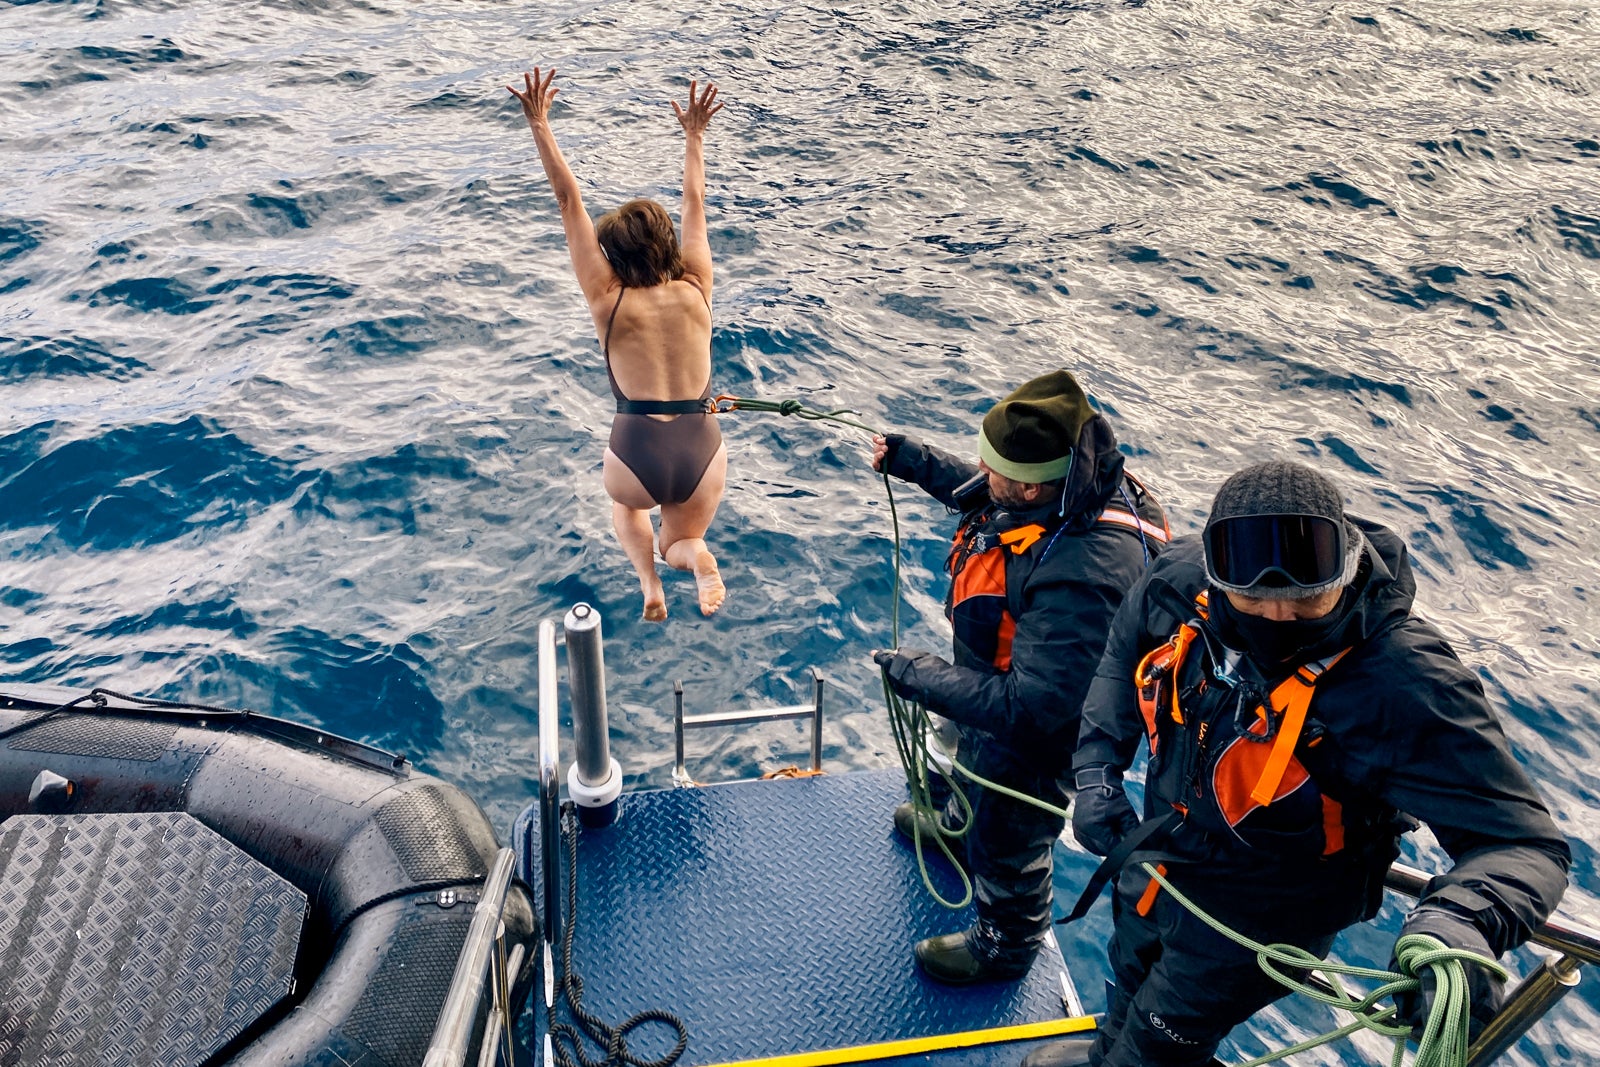 I jumped off a cruise ship in Antarctica and lived to tell the tale